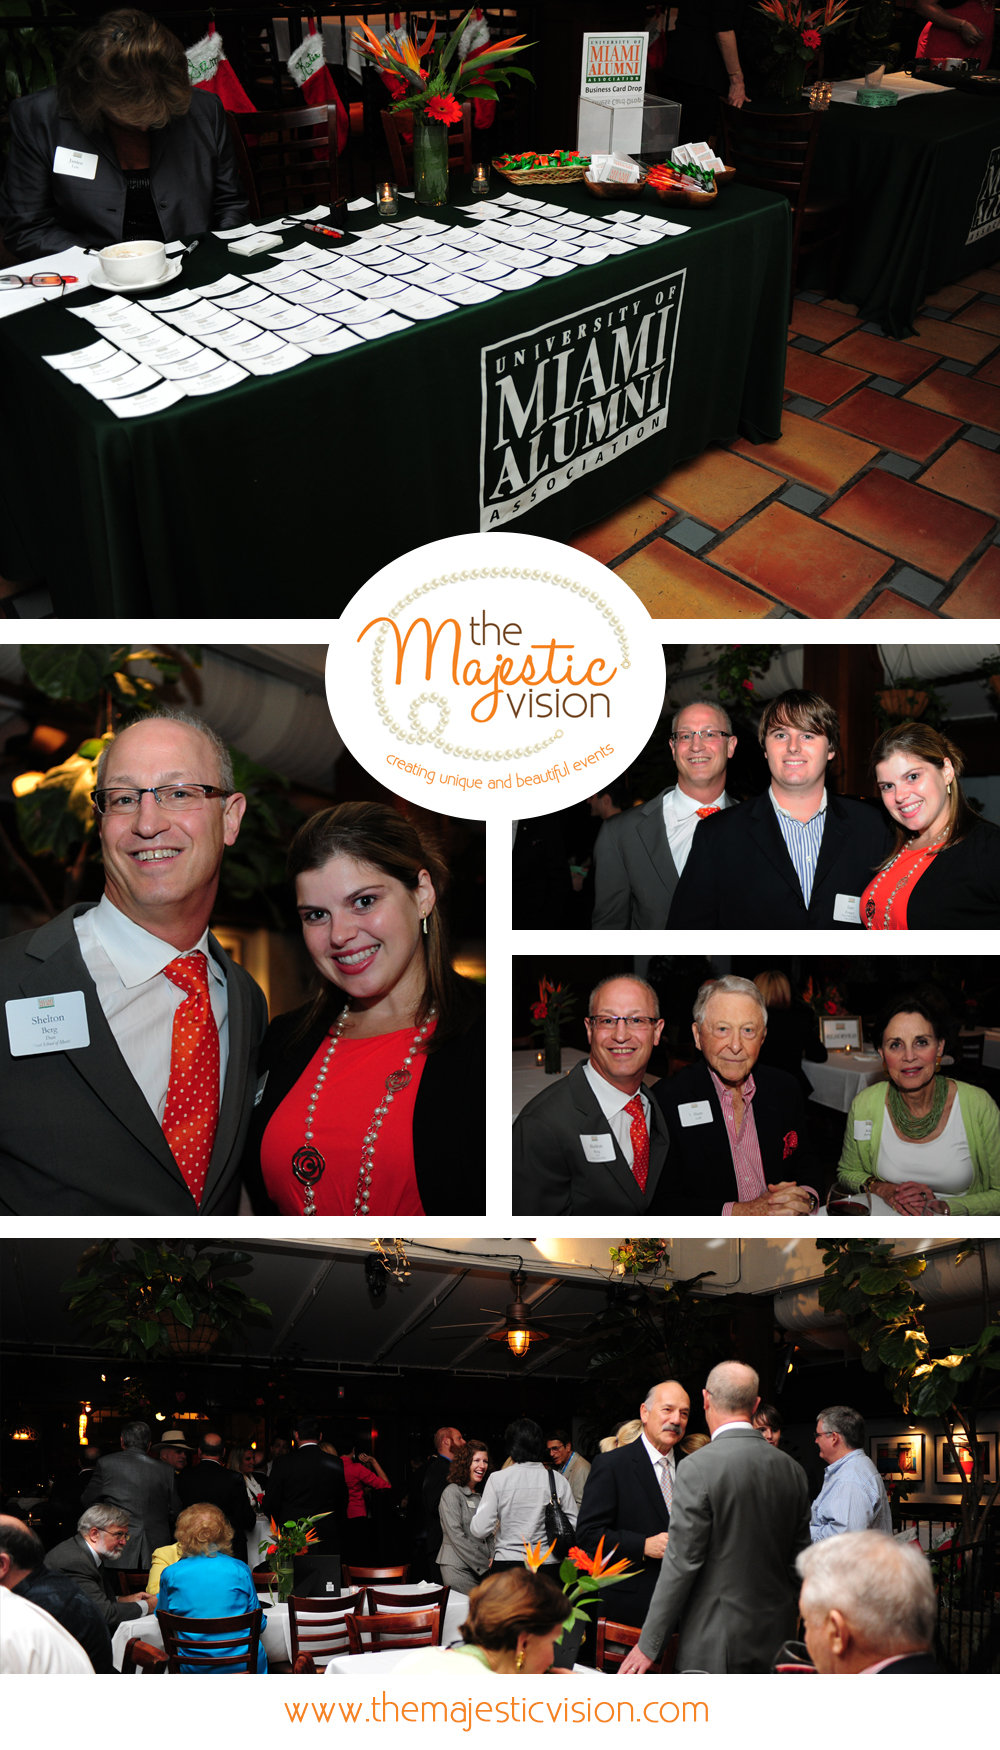 University of Miami Holiday Party with Dean Shelly Berg | The Majestic Vision Wedding Planning | Nick and Johnnie's in Palm Beach, FL | www.themajesticvision.com | Emily Allongo Photography